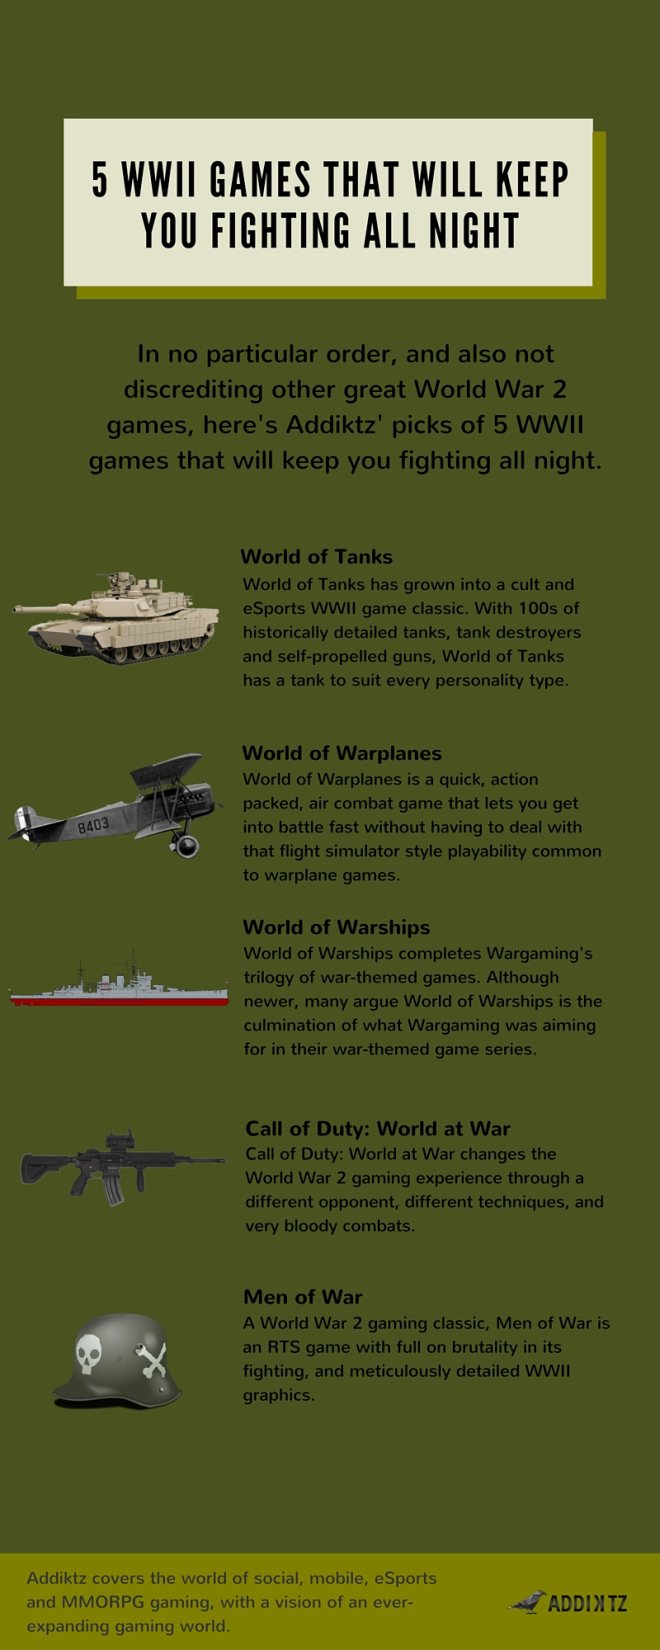 5 WWII Games That Will Keep You Fighting All Night | War Games Infographic